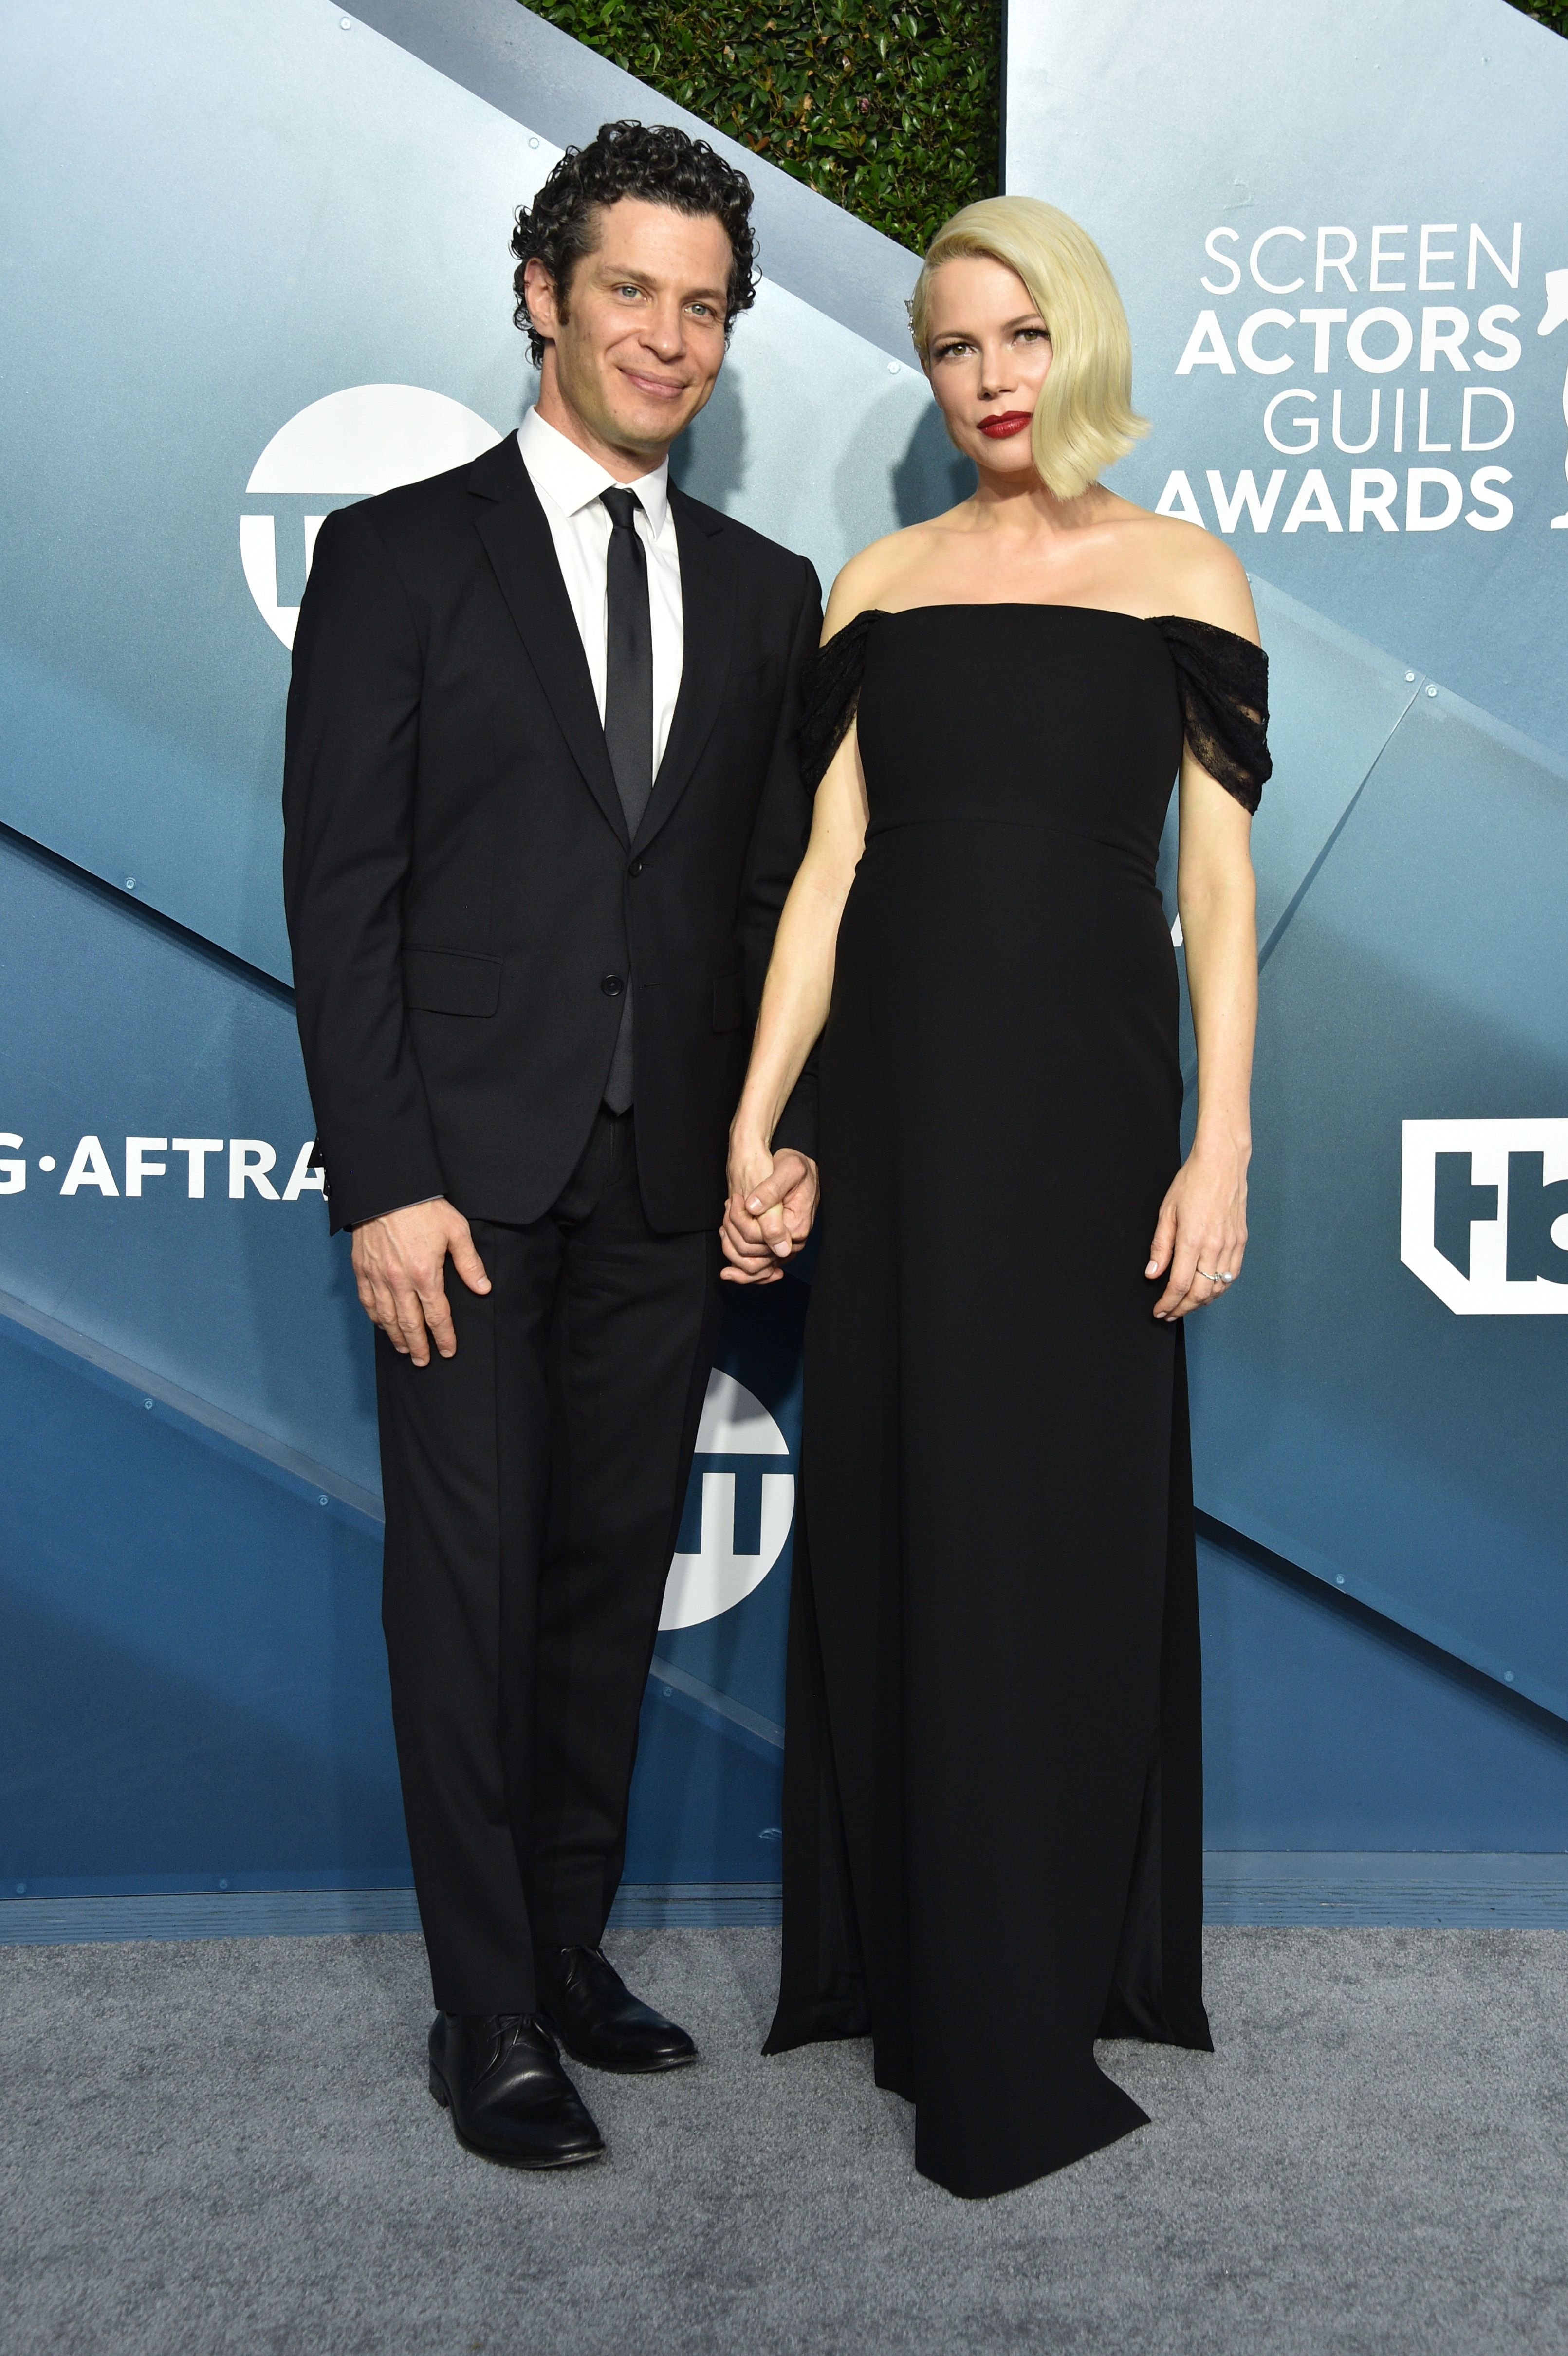 Thomas Kail and Michelle Williams at the 26th Annual Screen Actors Guild Awards at The Shrine Auditorium on January 19, 2020 in Los Angeles, California | Photo: Getty Images 